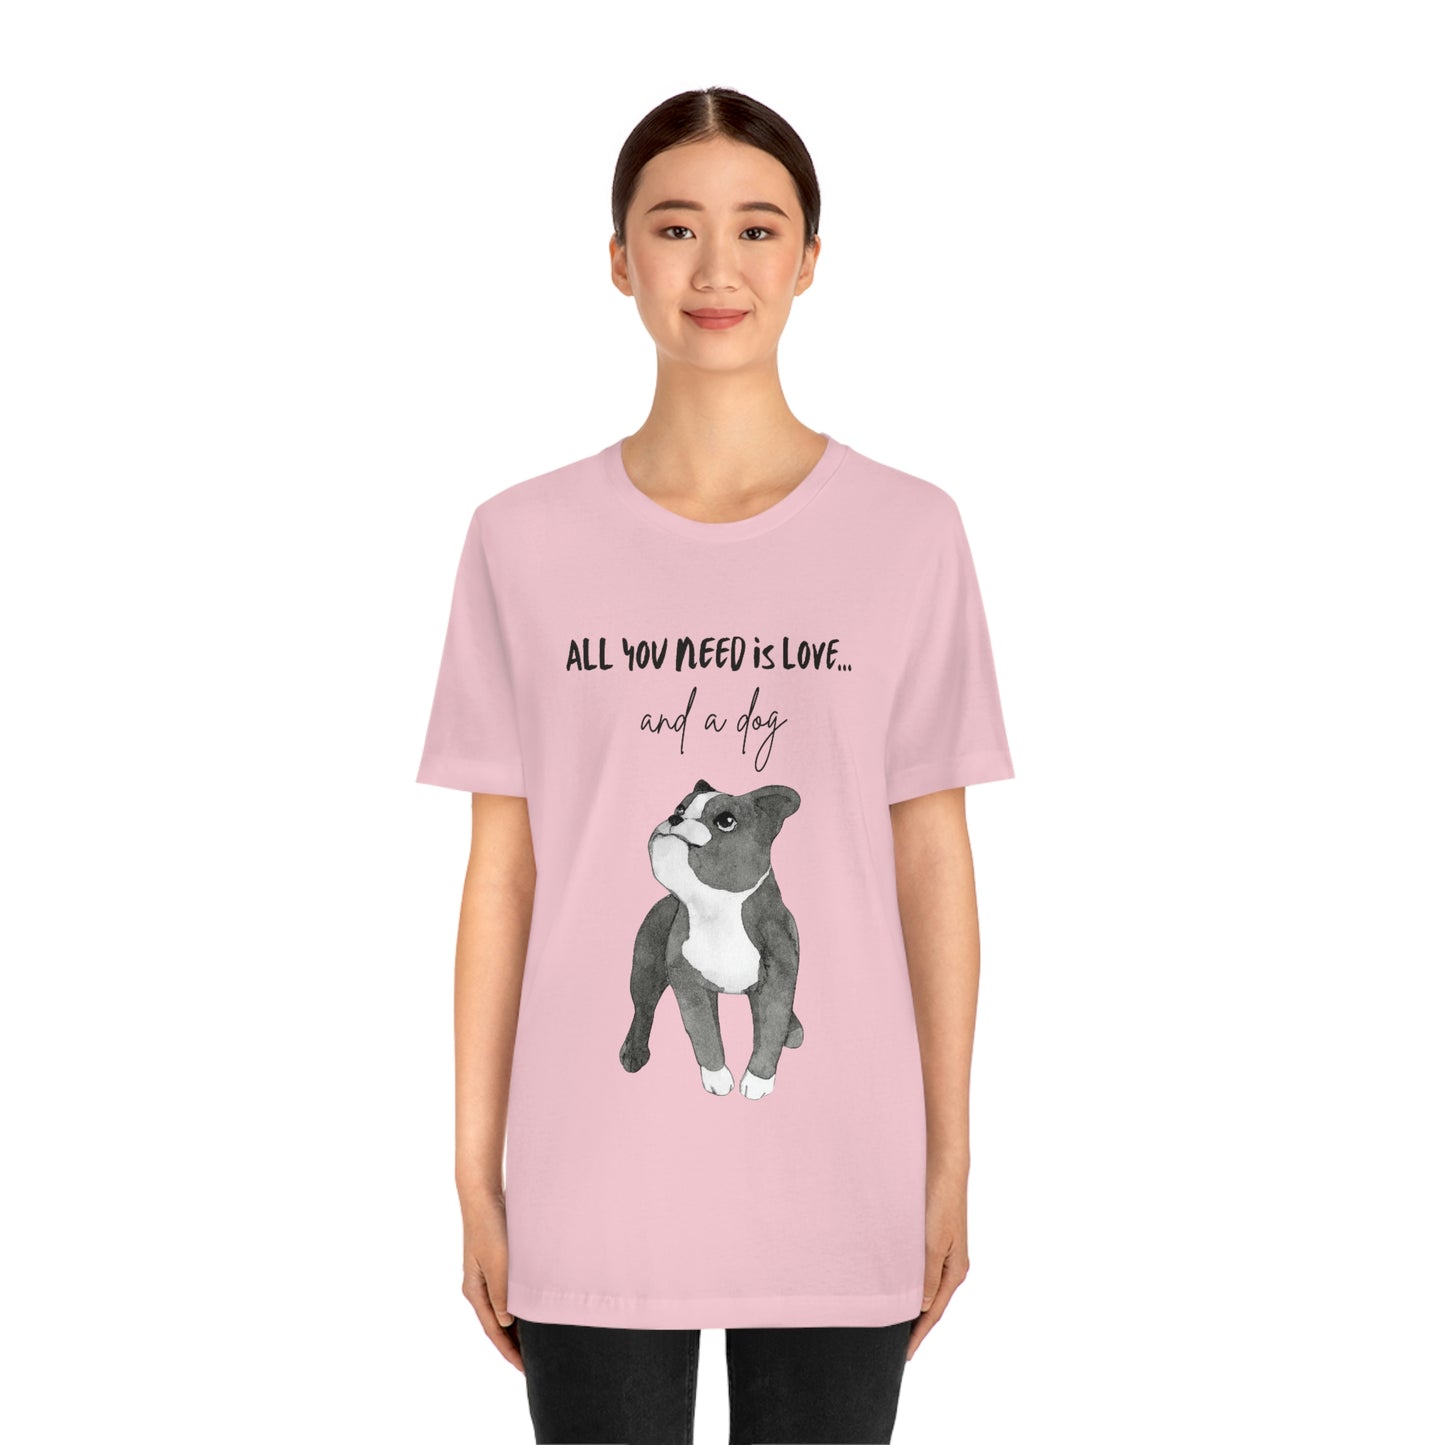 All You Need Is Love And A Dog Unisex Jersey Short Sleeve Tee | “Happy Dog” Black Dog Tee Shirt